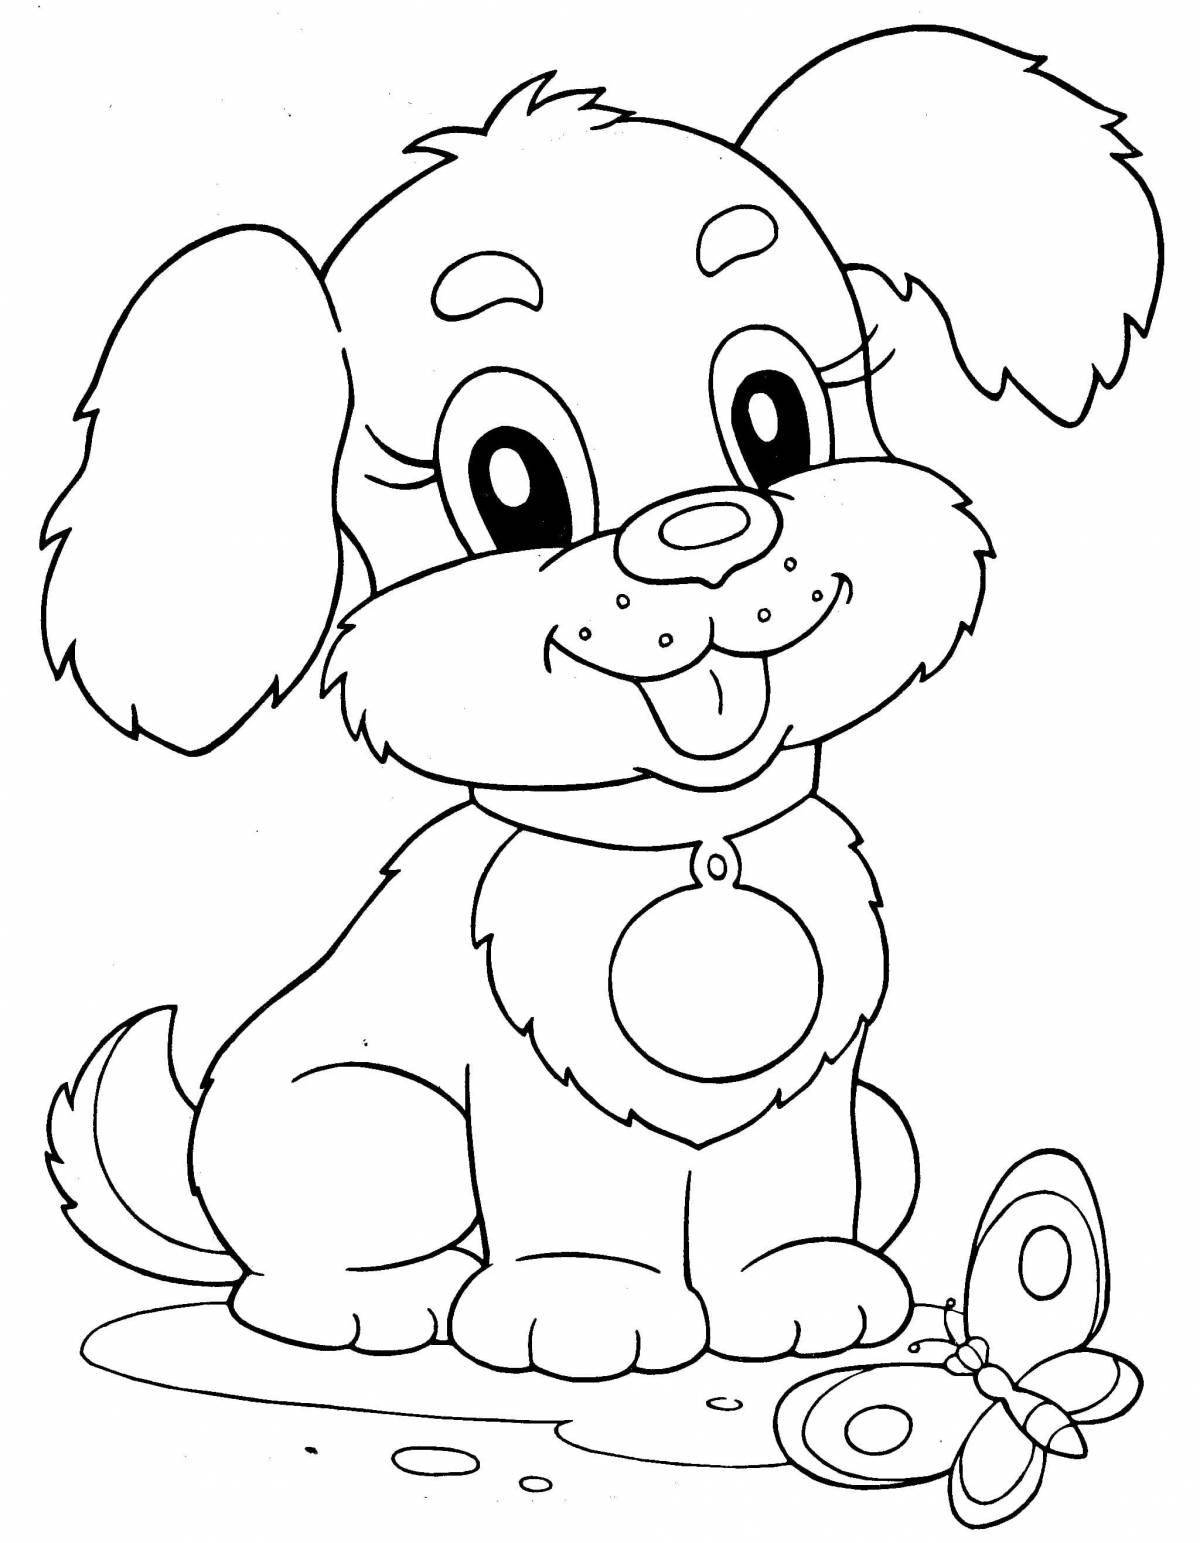 Colour-creating coloring pages for 5 year olds